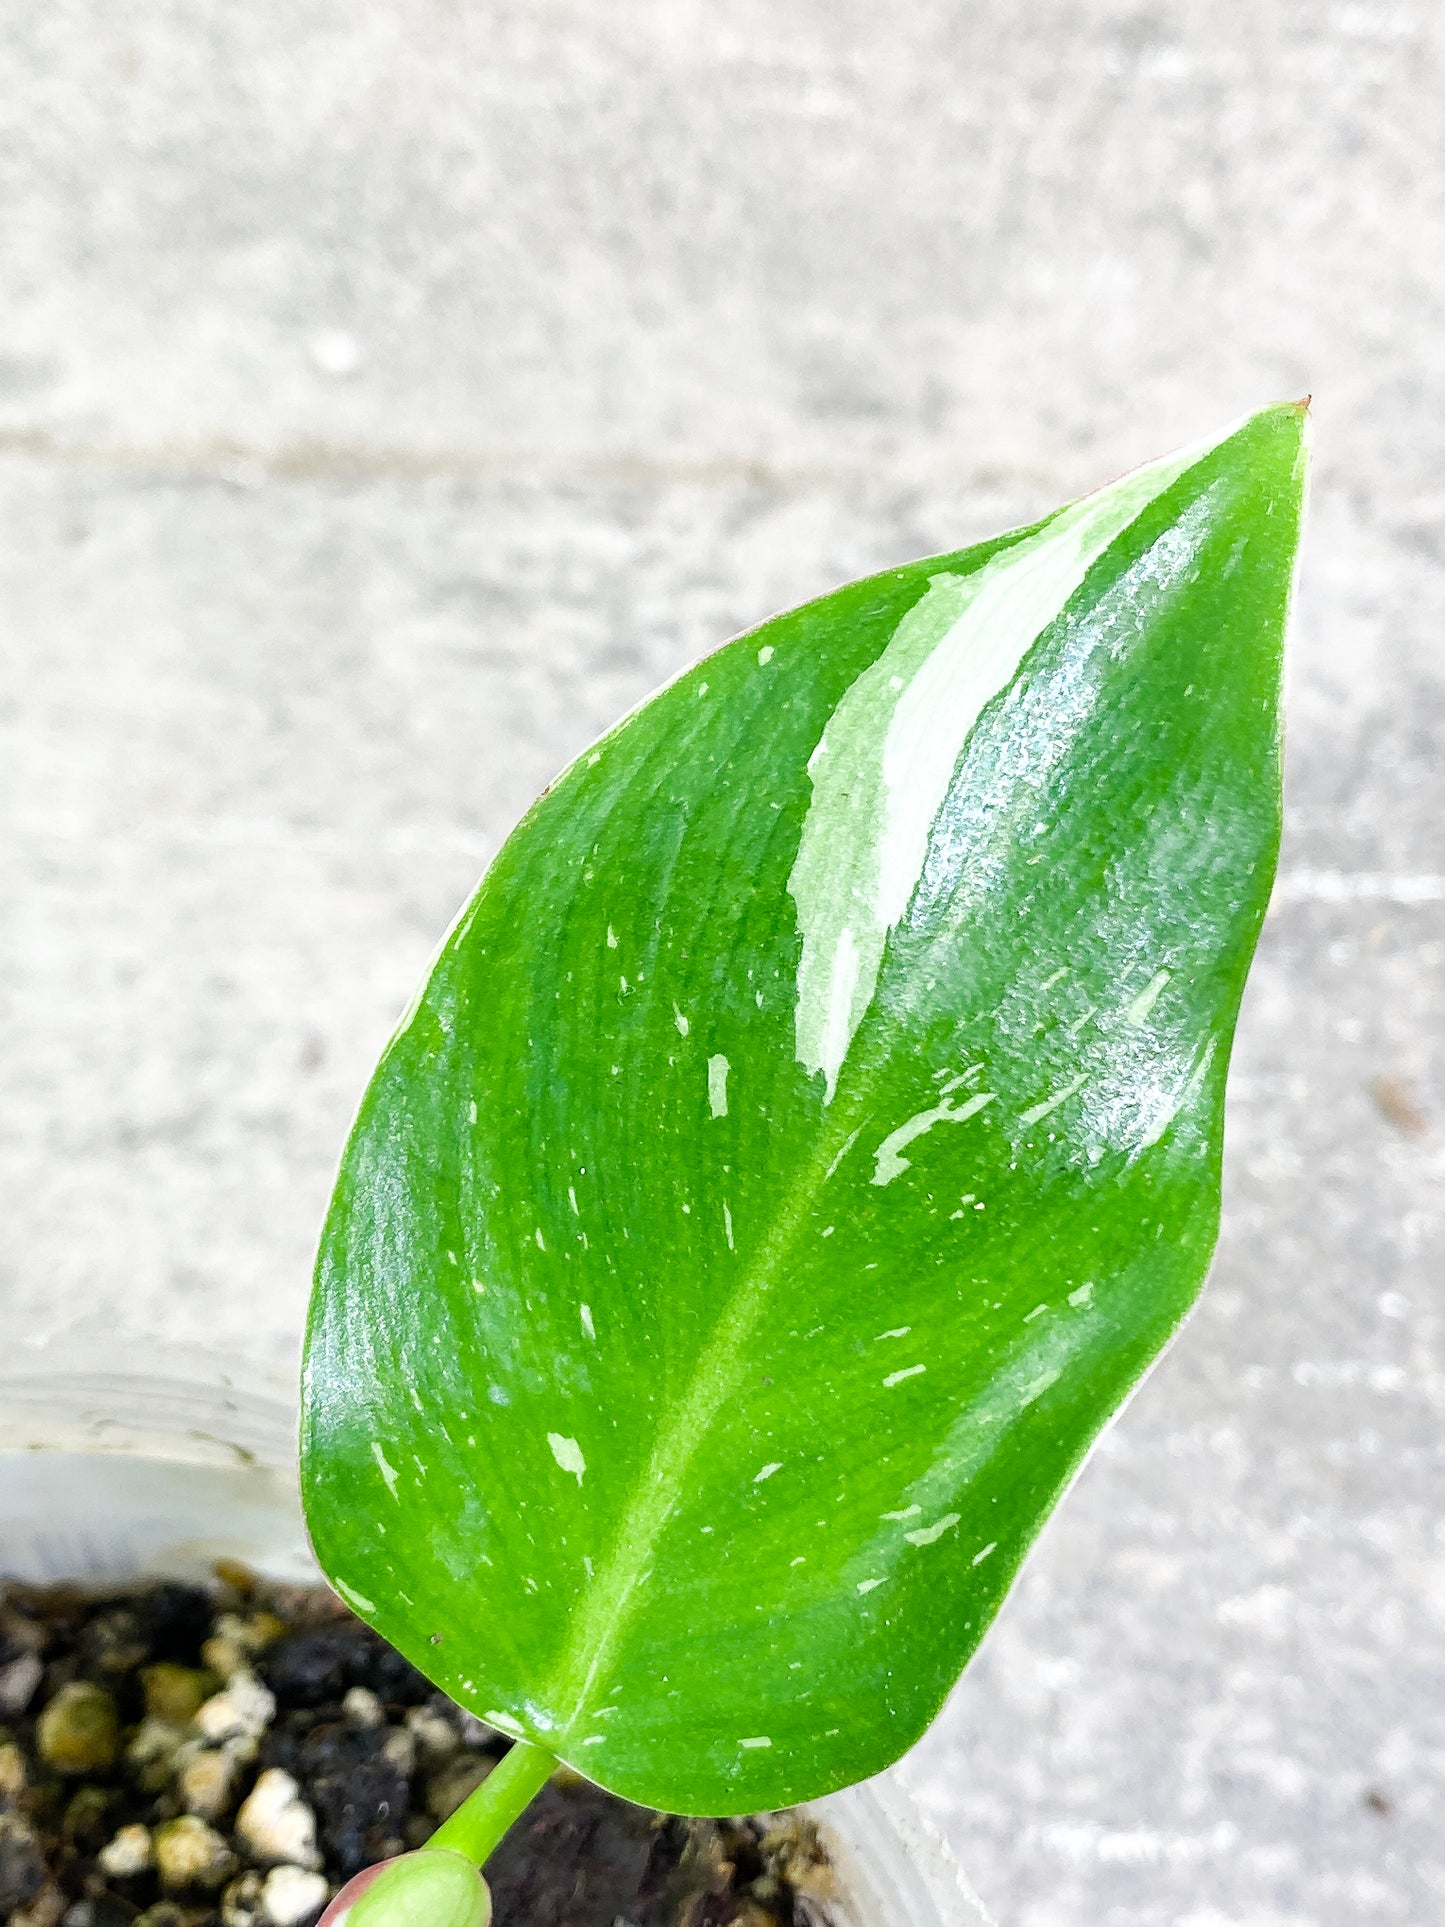 $5 Add-on Deal:  Philodendron white princess 3 leaves 1 sprout fully rooted